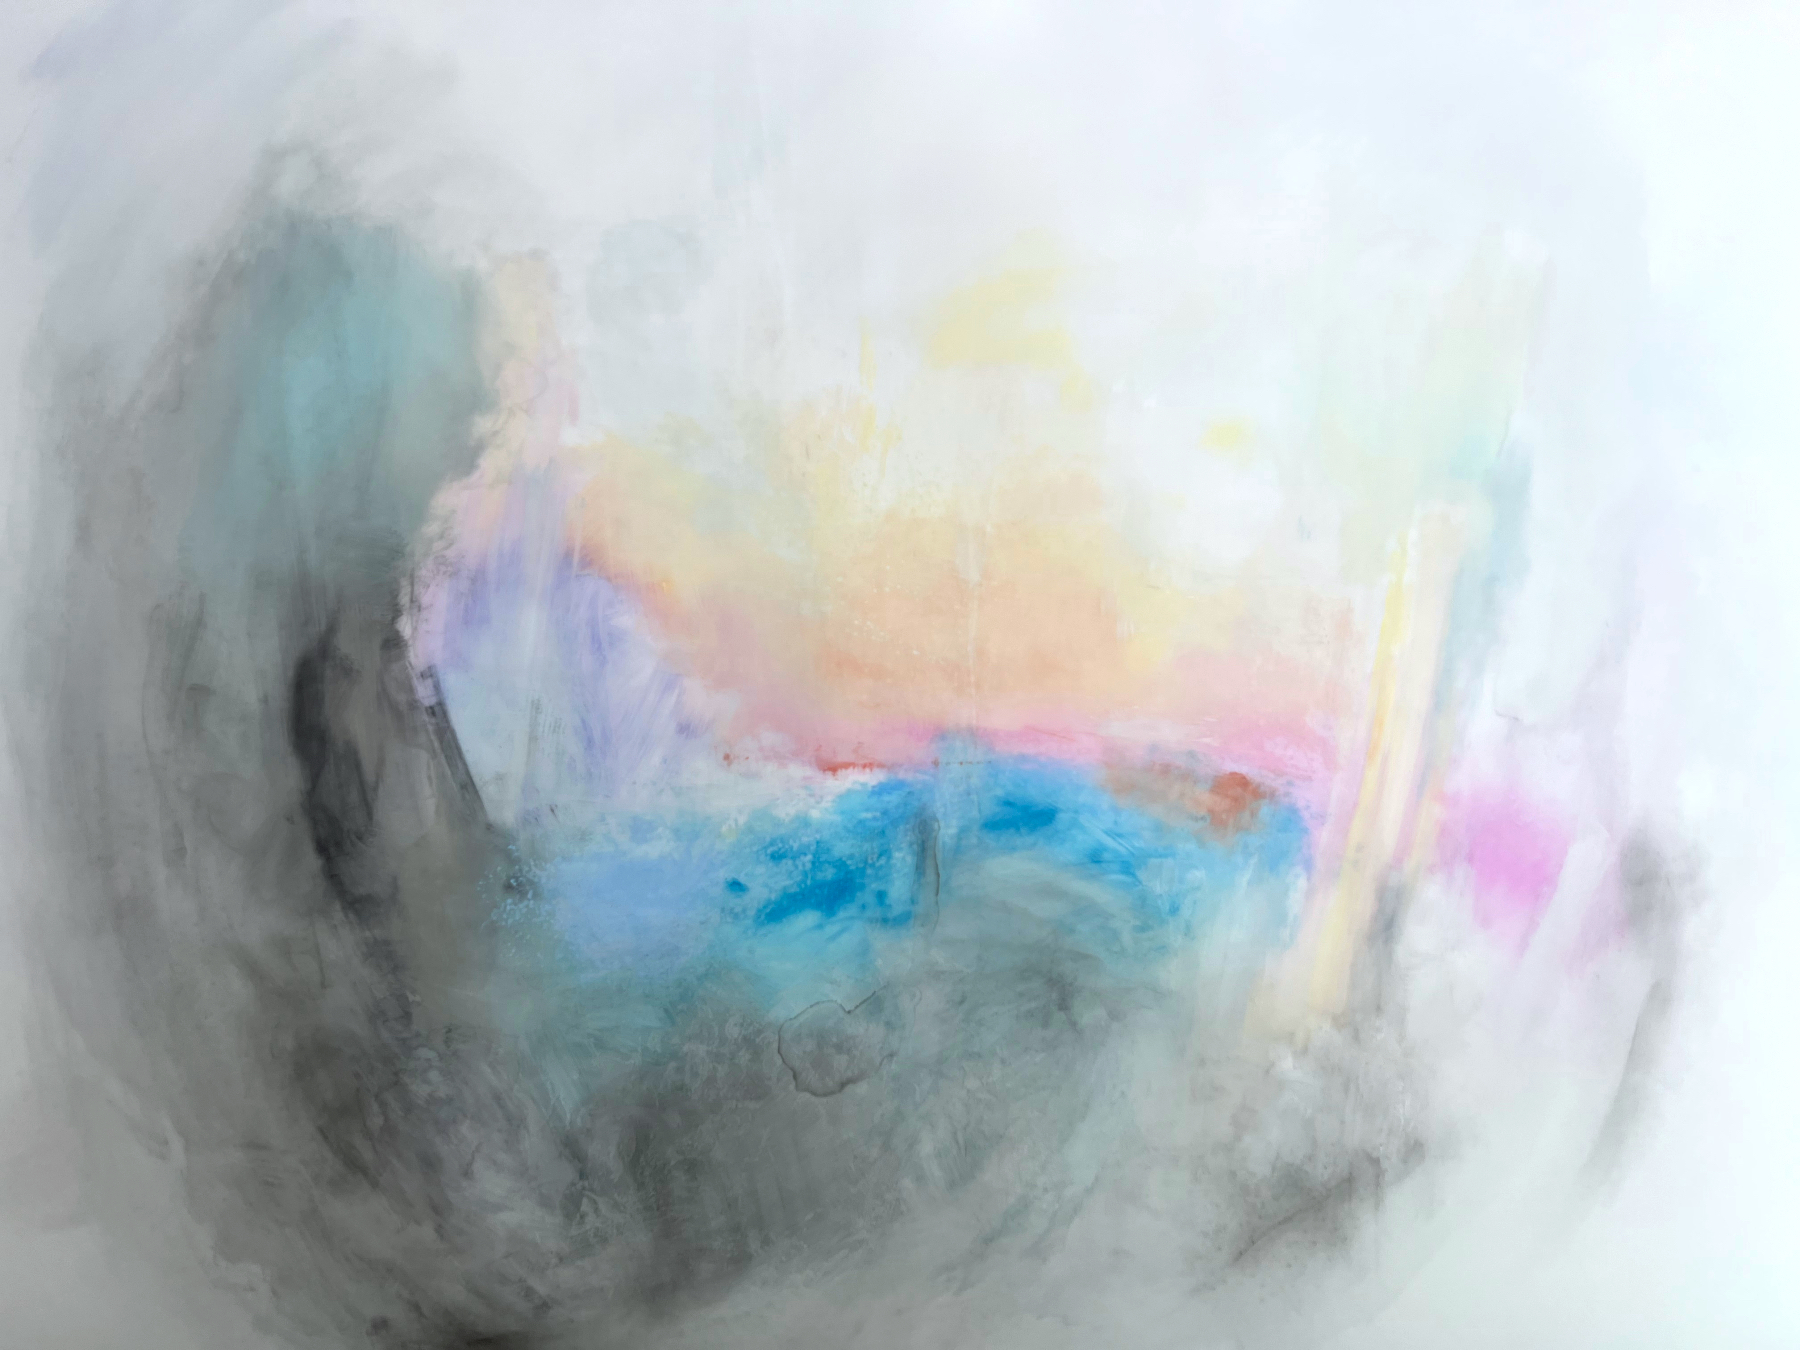 soft gray, pink and yellow sunrise over abstract land/seascape in cereulean blue